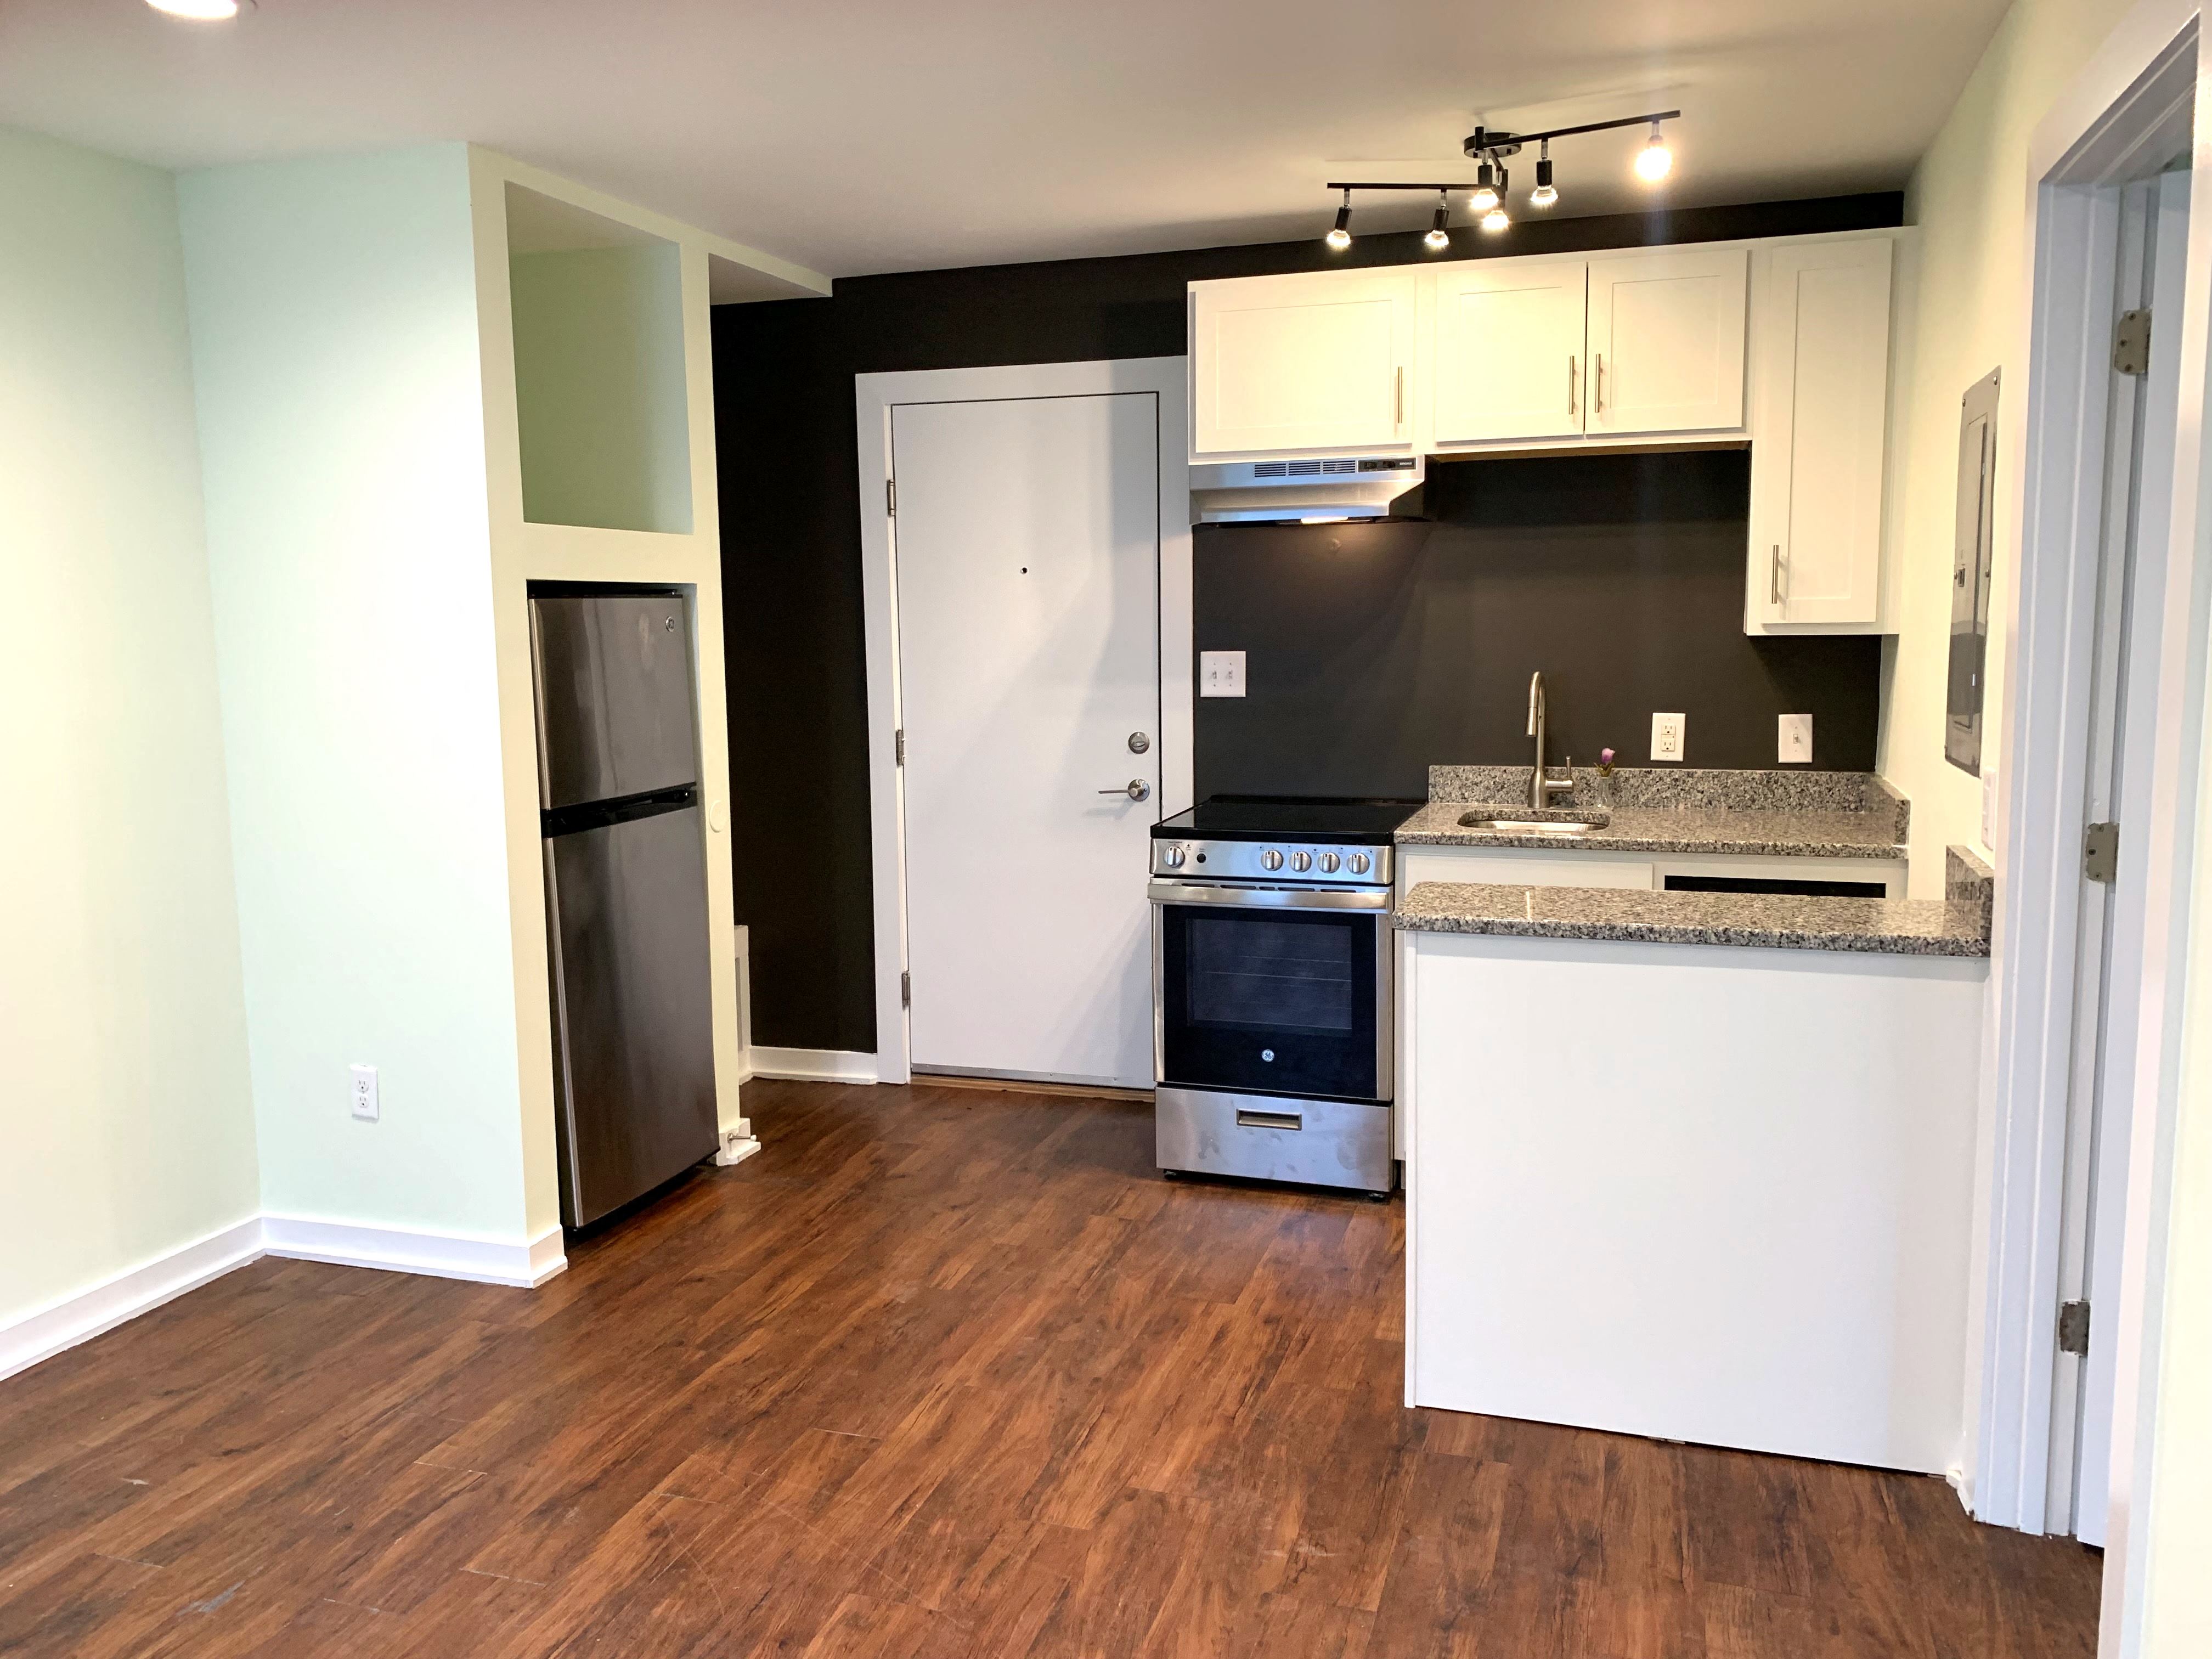 718 S. 5th Avenue – Apartment 2 | *$500 OFF FIRST MONTH’S RENT*